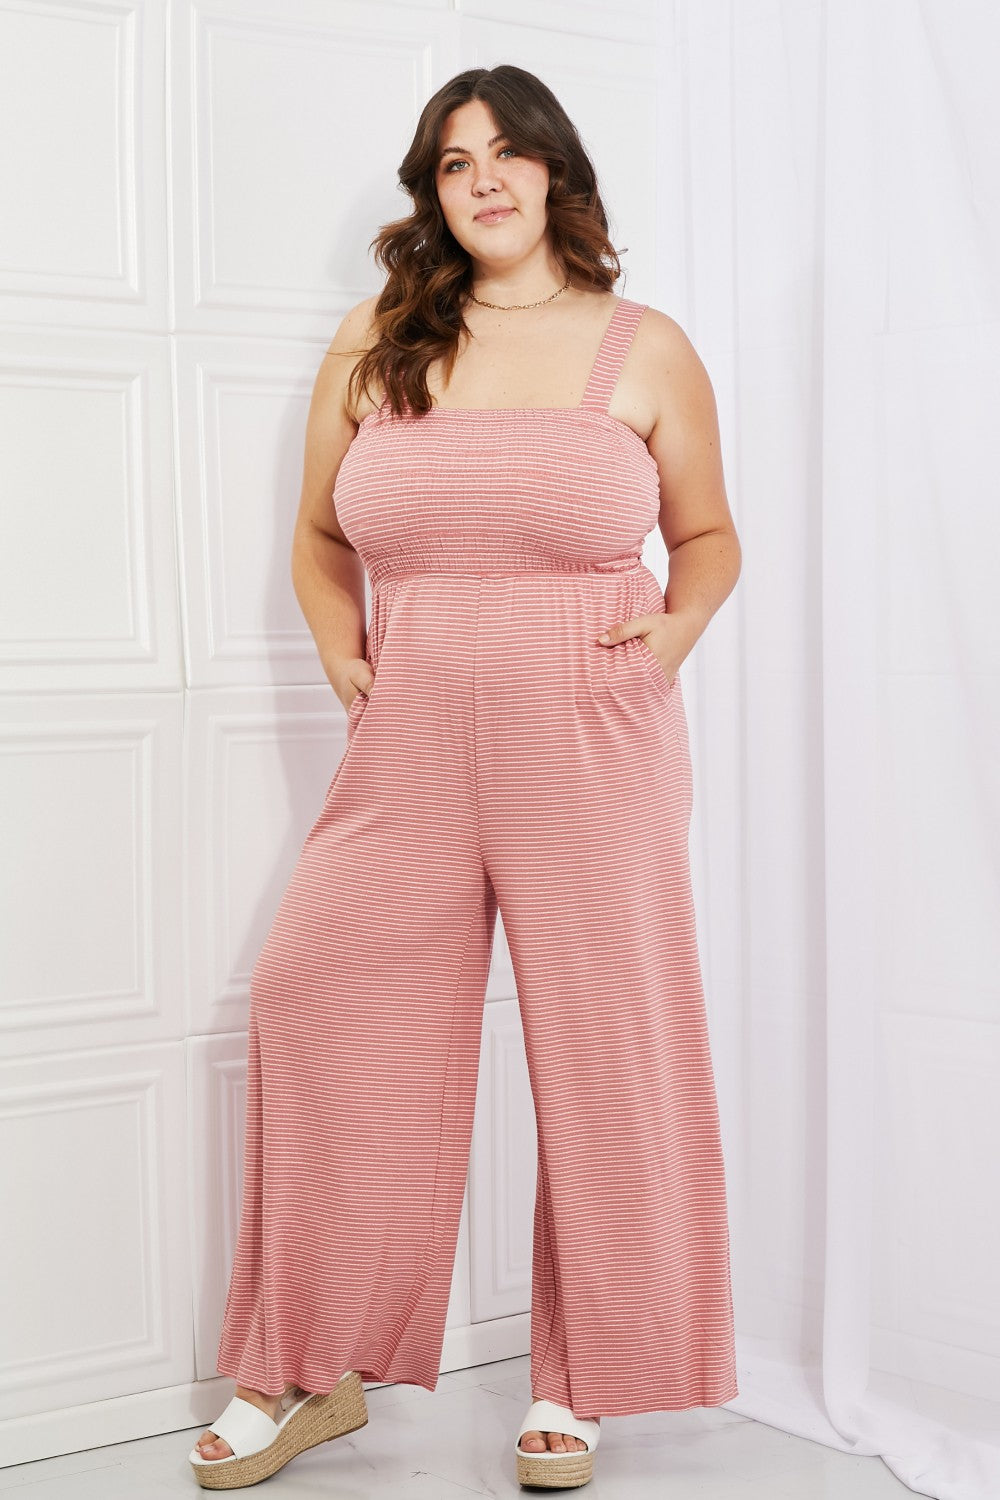 Only Exception Full Size Striped Jumpsuit - Women’s Clothing & Accessories - Jumpsuits & Rompers - 6 - 2024